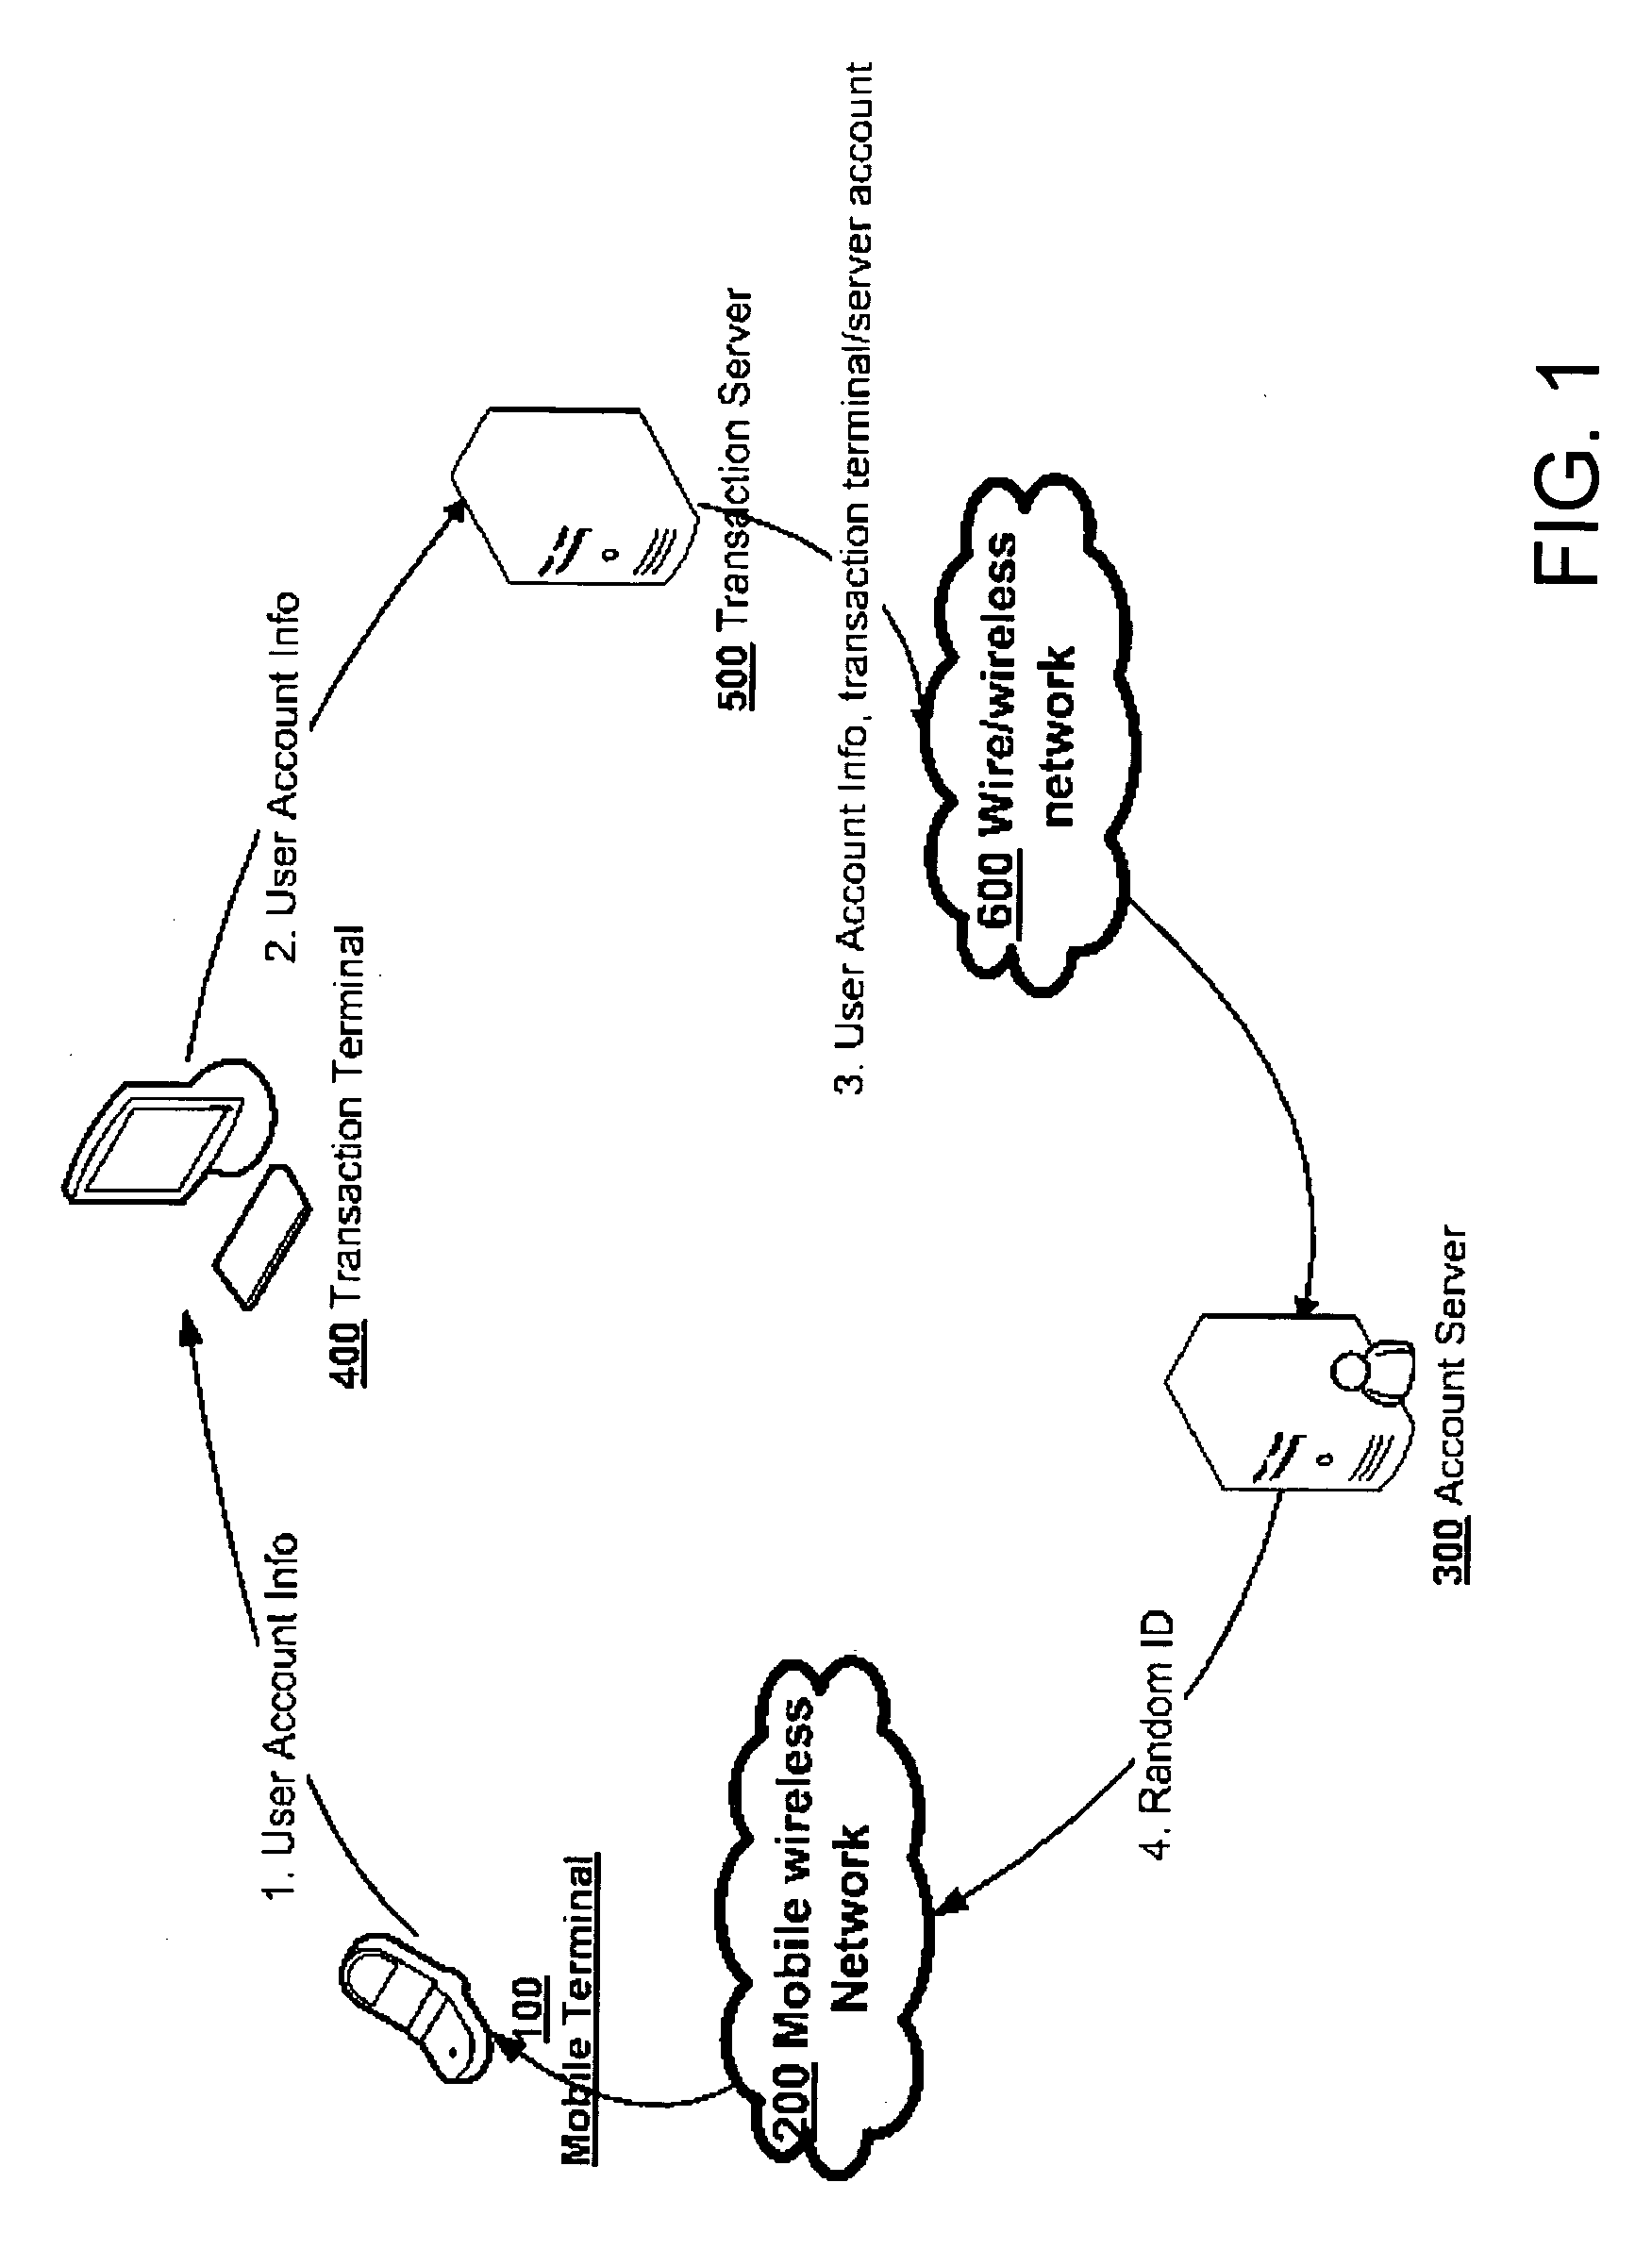 Method and apparatus of secure authentication and electronic payment through mobile communication tool